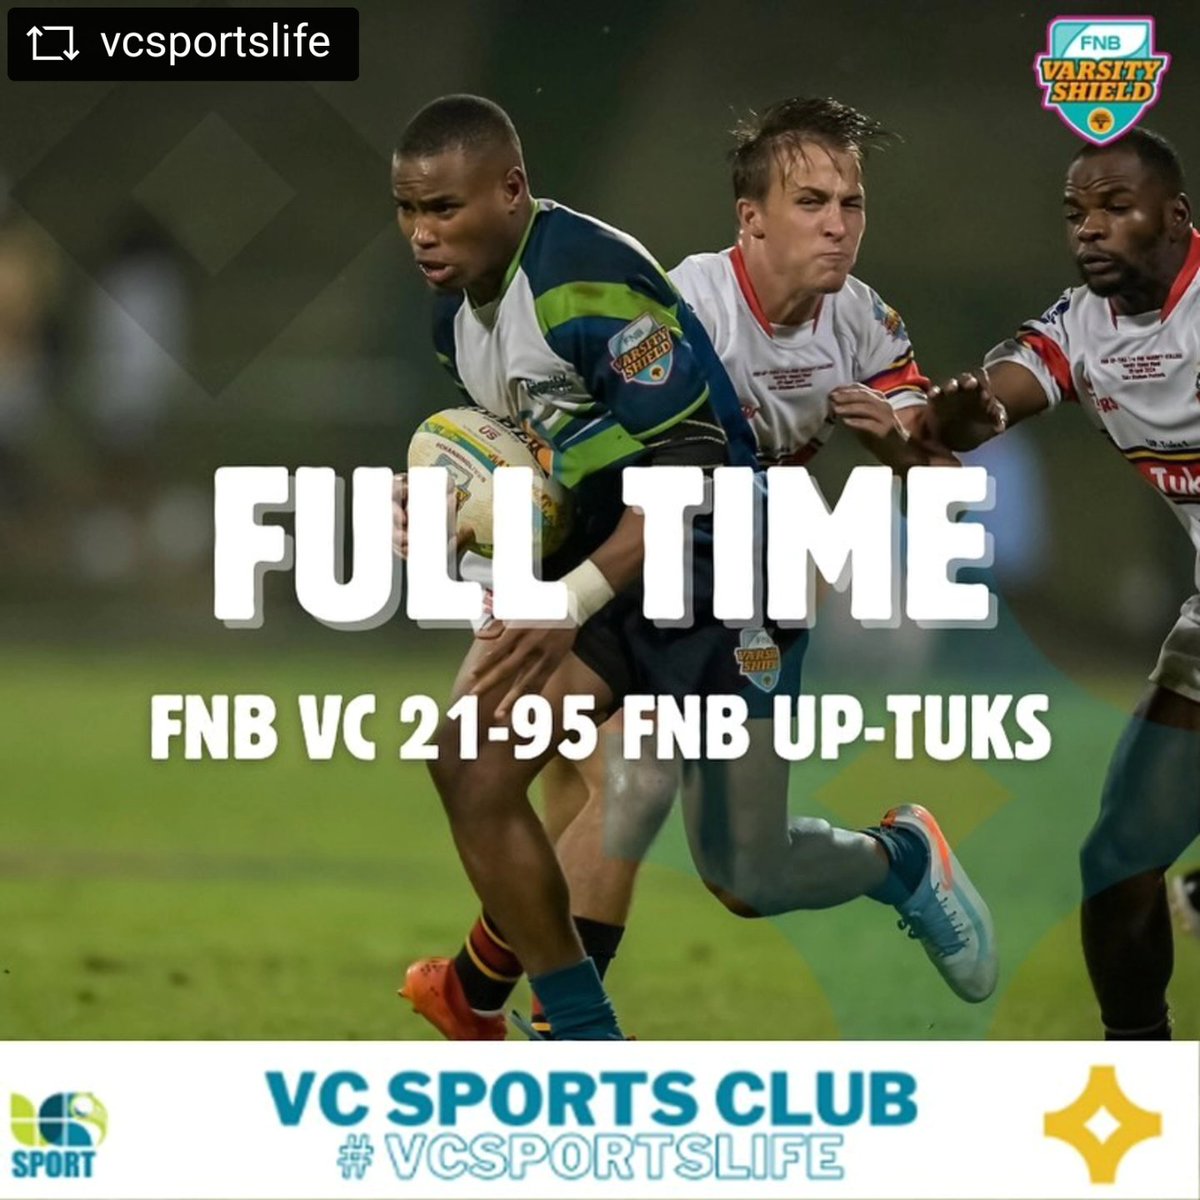 What an outstanding display of excellence by the FNB Comets throughout the season. We're so proud.

Congratulations to FNB Up-Tuks for being crowned 2024 Varsity Shield Champions.

#varsityshield
#rugbythatrocks
#fansthatrock